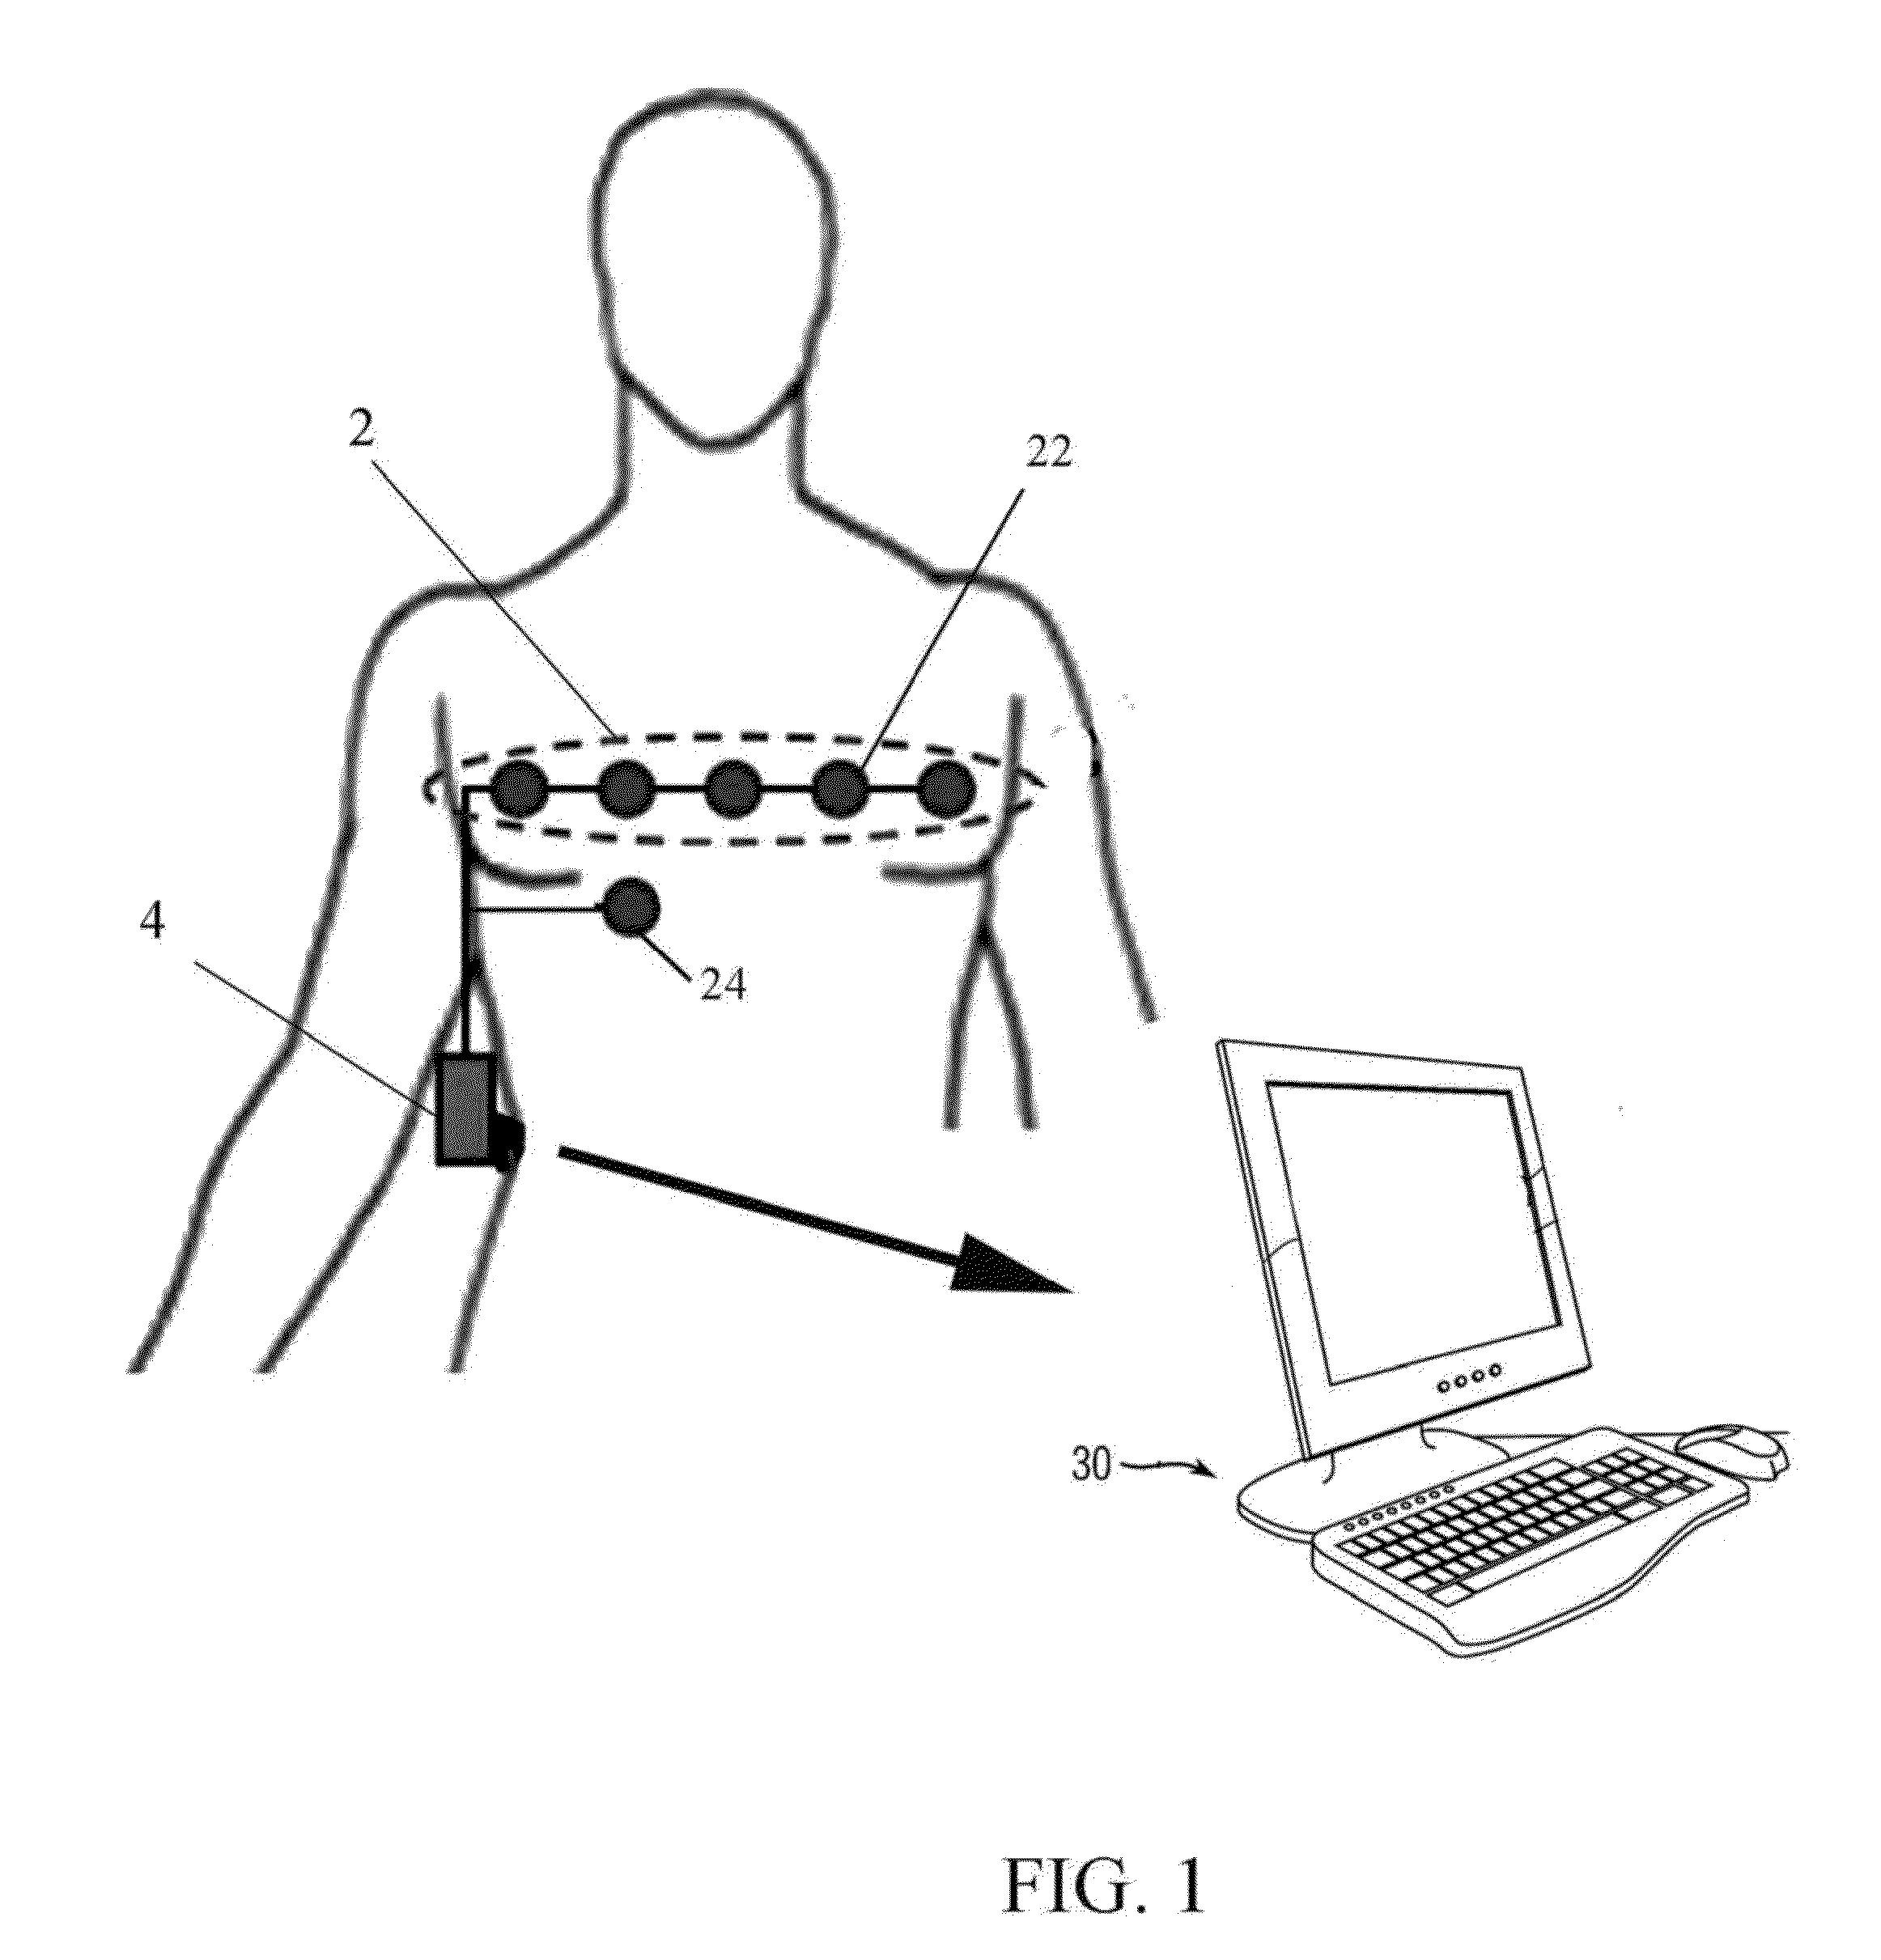 Method and apparatus to monitor physiologic and biometric parameters using a non-invasive set of transducers